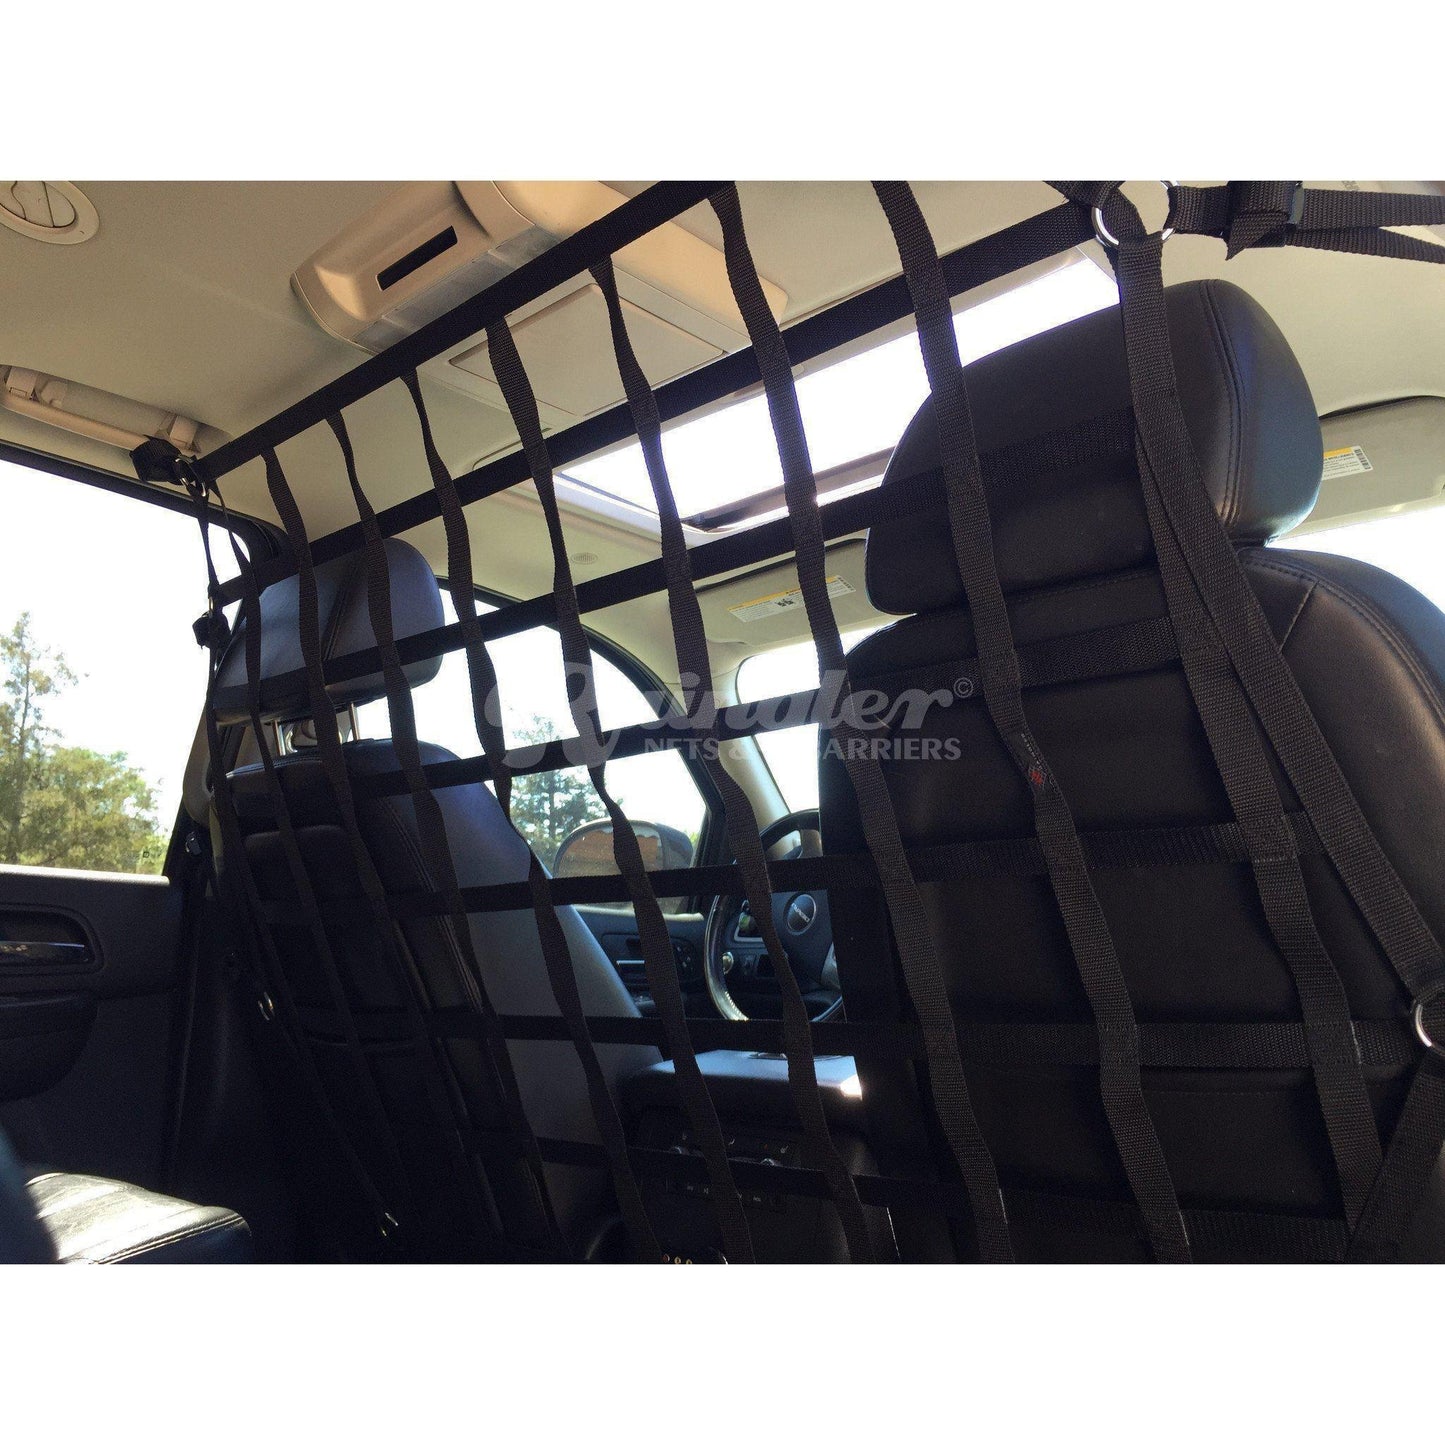 2007 - 2014 Chevrolet Silverado 2500 and 3500 Crew Cab / Extended Cab Behind Front Seats Barrier Divider Net